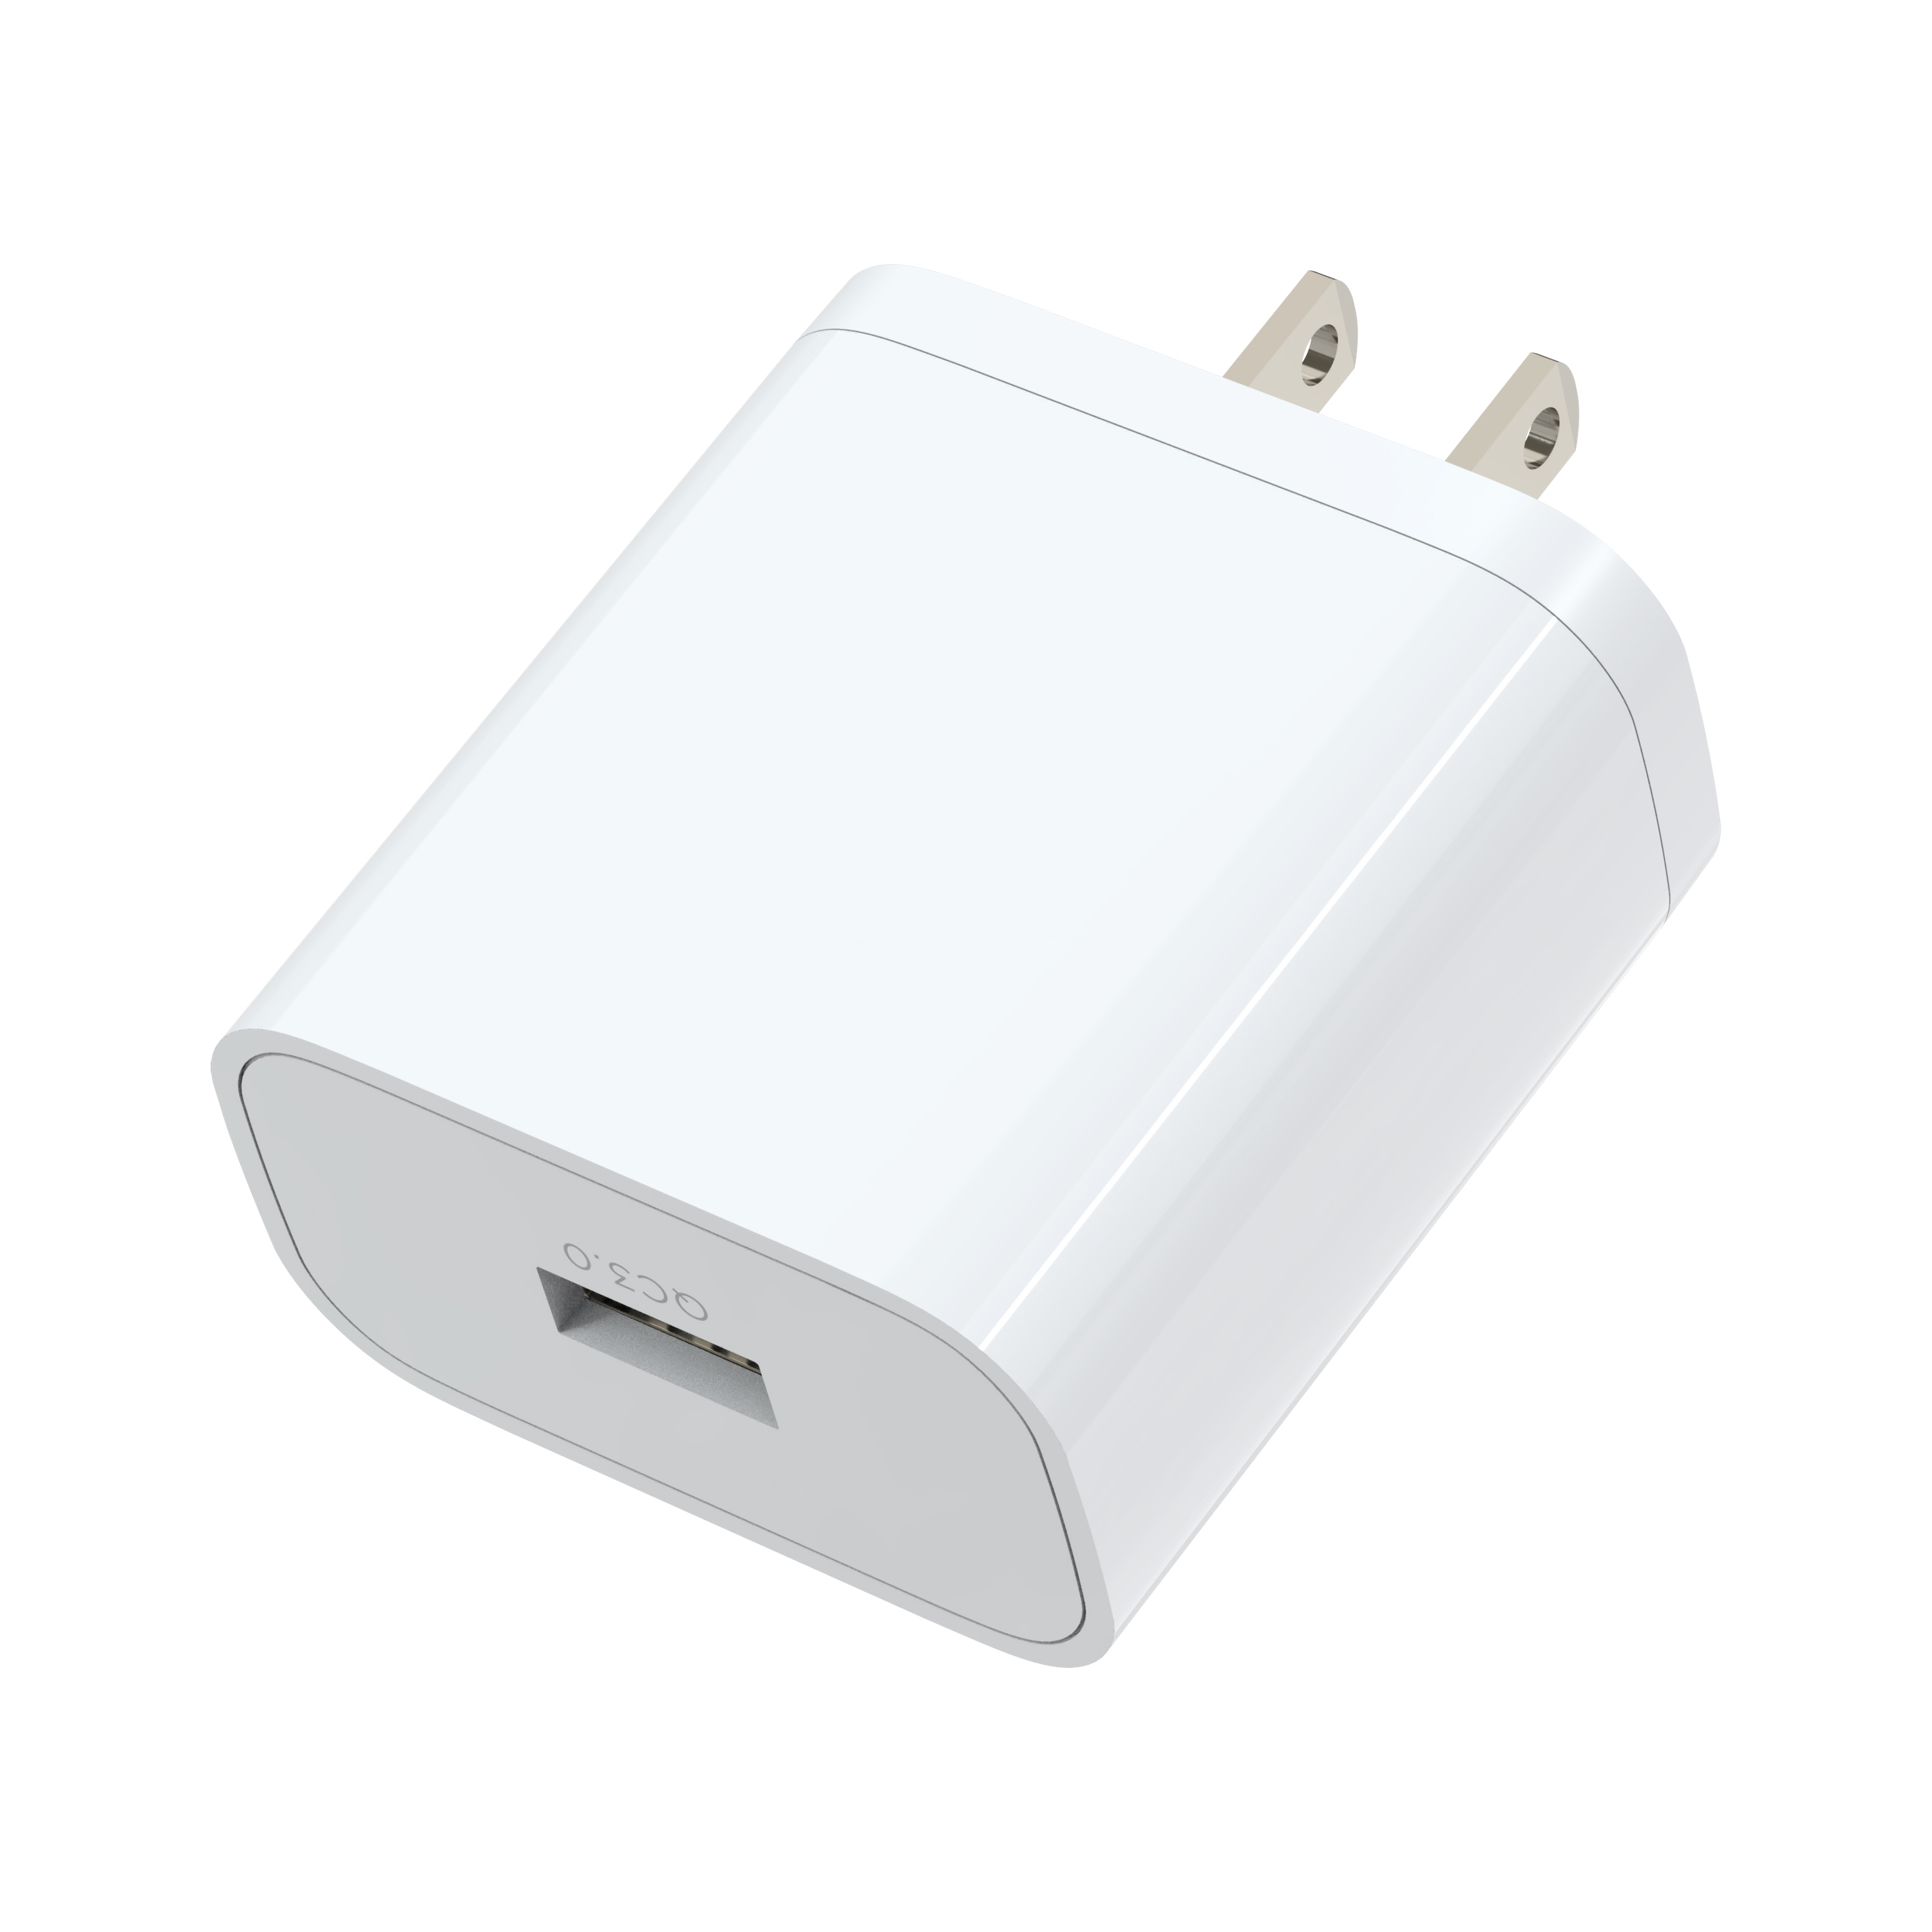 USB fast charge qc3.0 charger 18w wall charger mobile phone charger